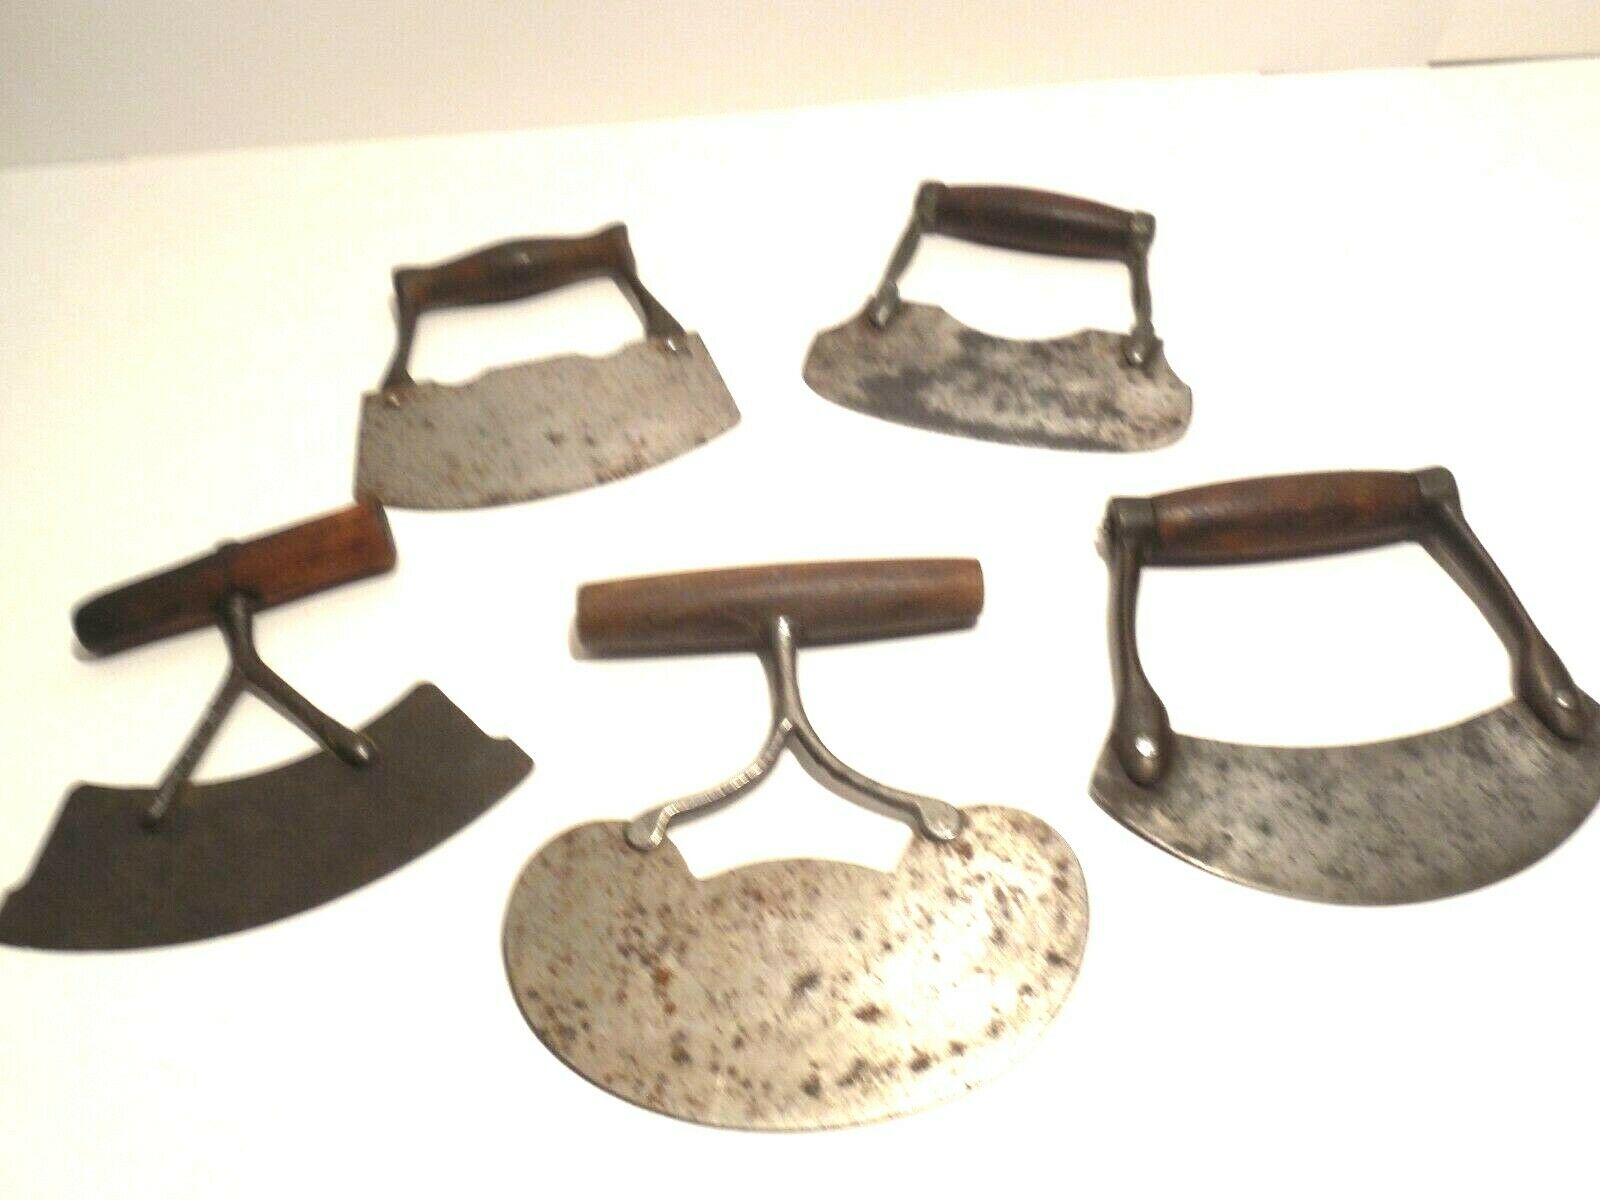 Choppers - Food Choppers From 1900's -- A Few Of Them!